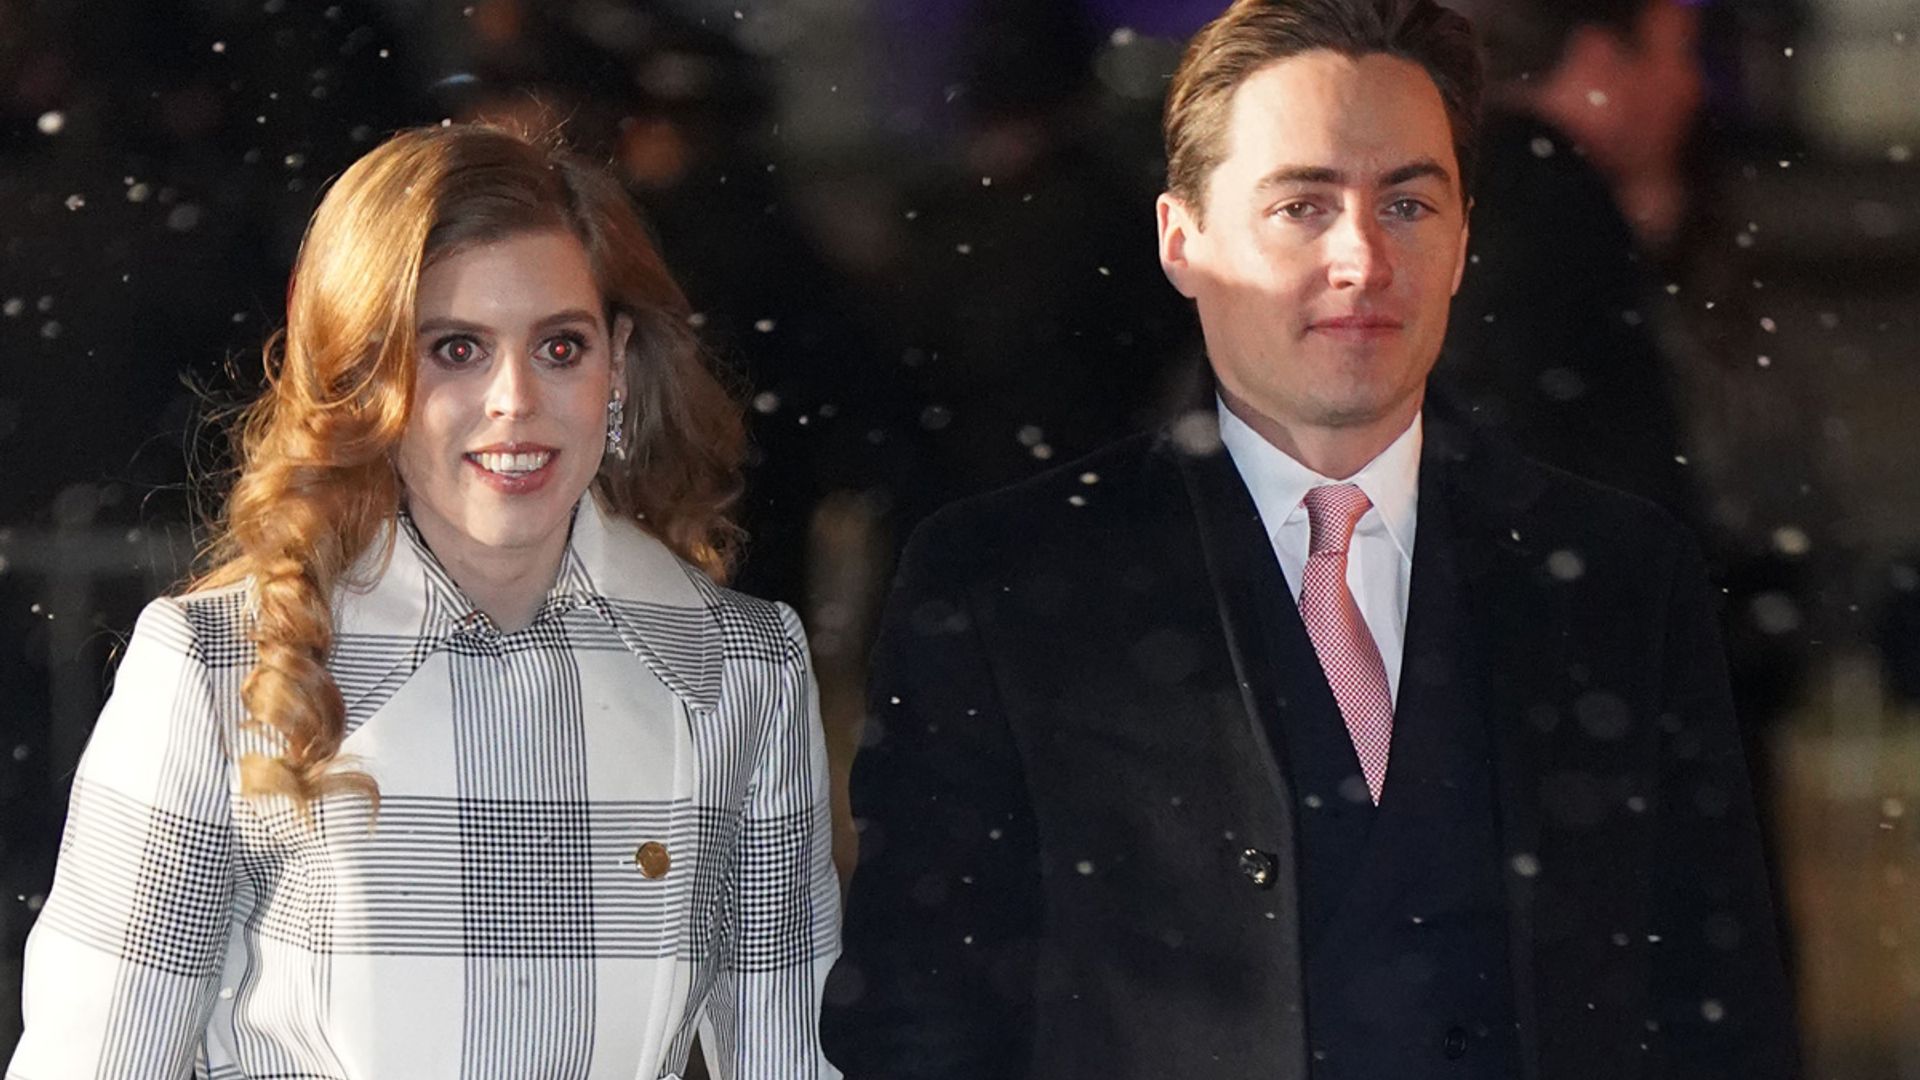 princess beatrice wears white and grey coat